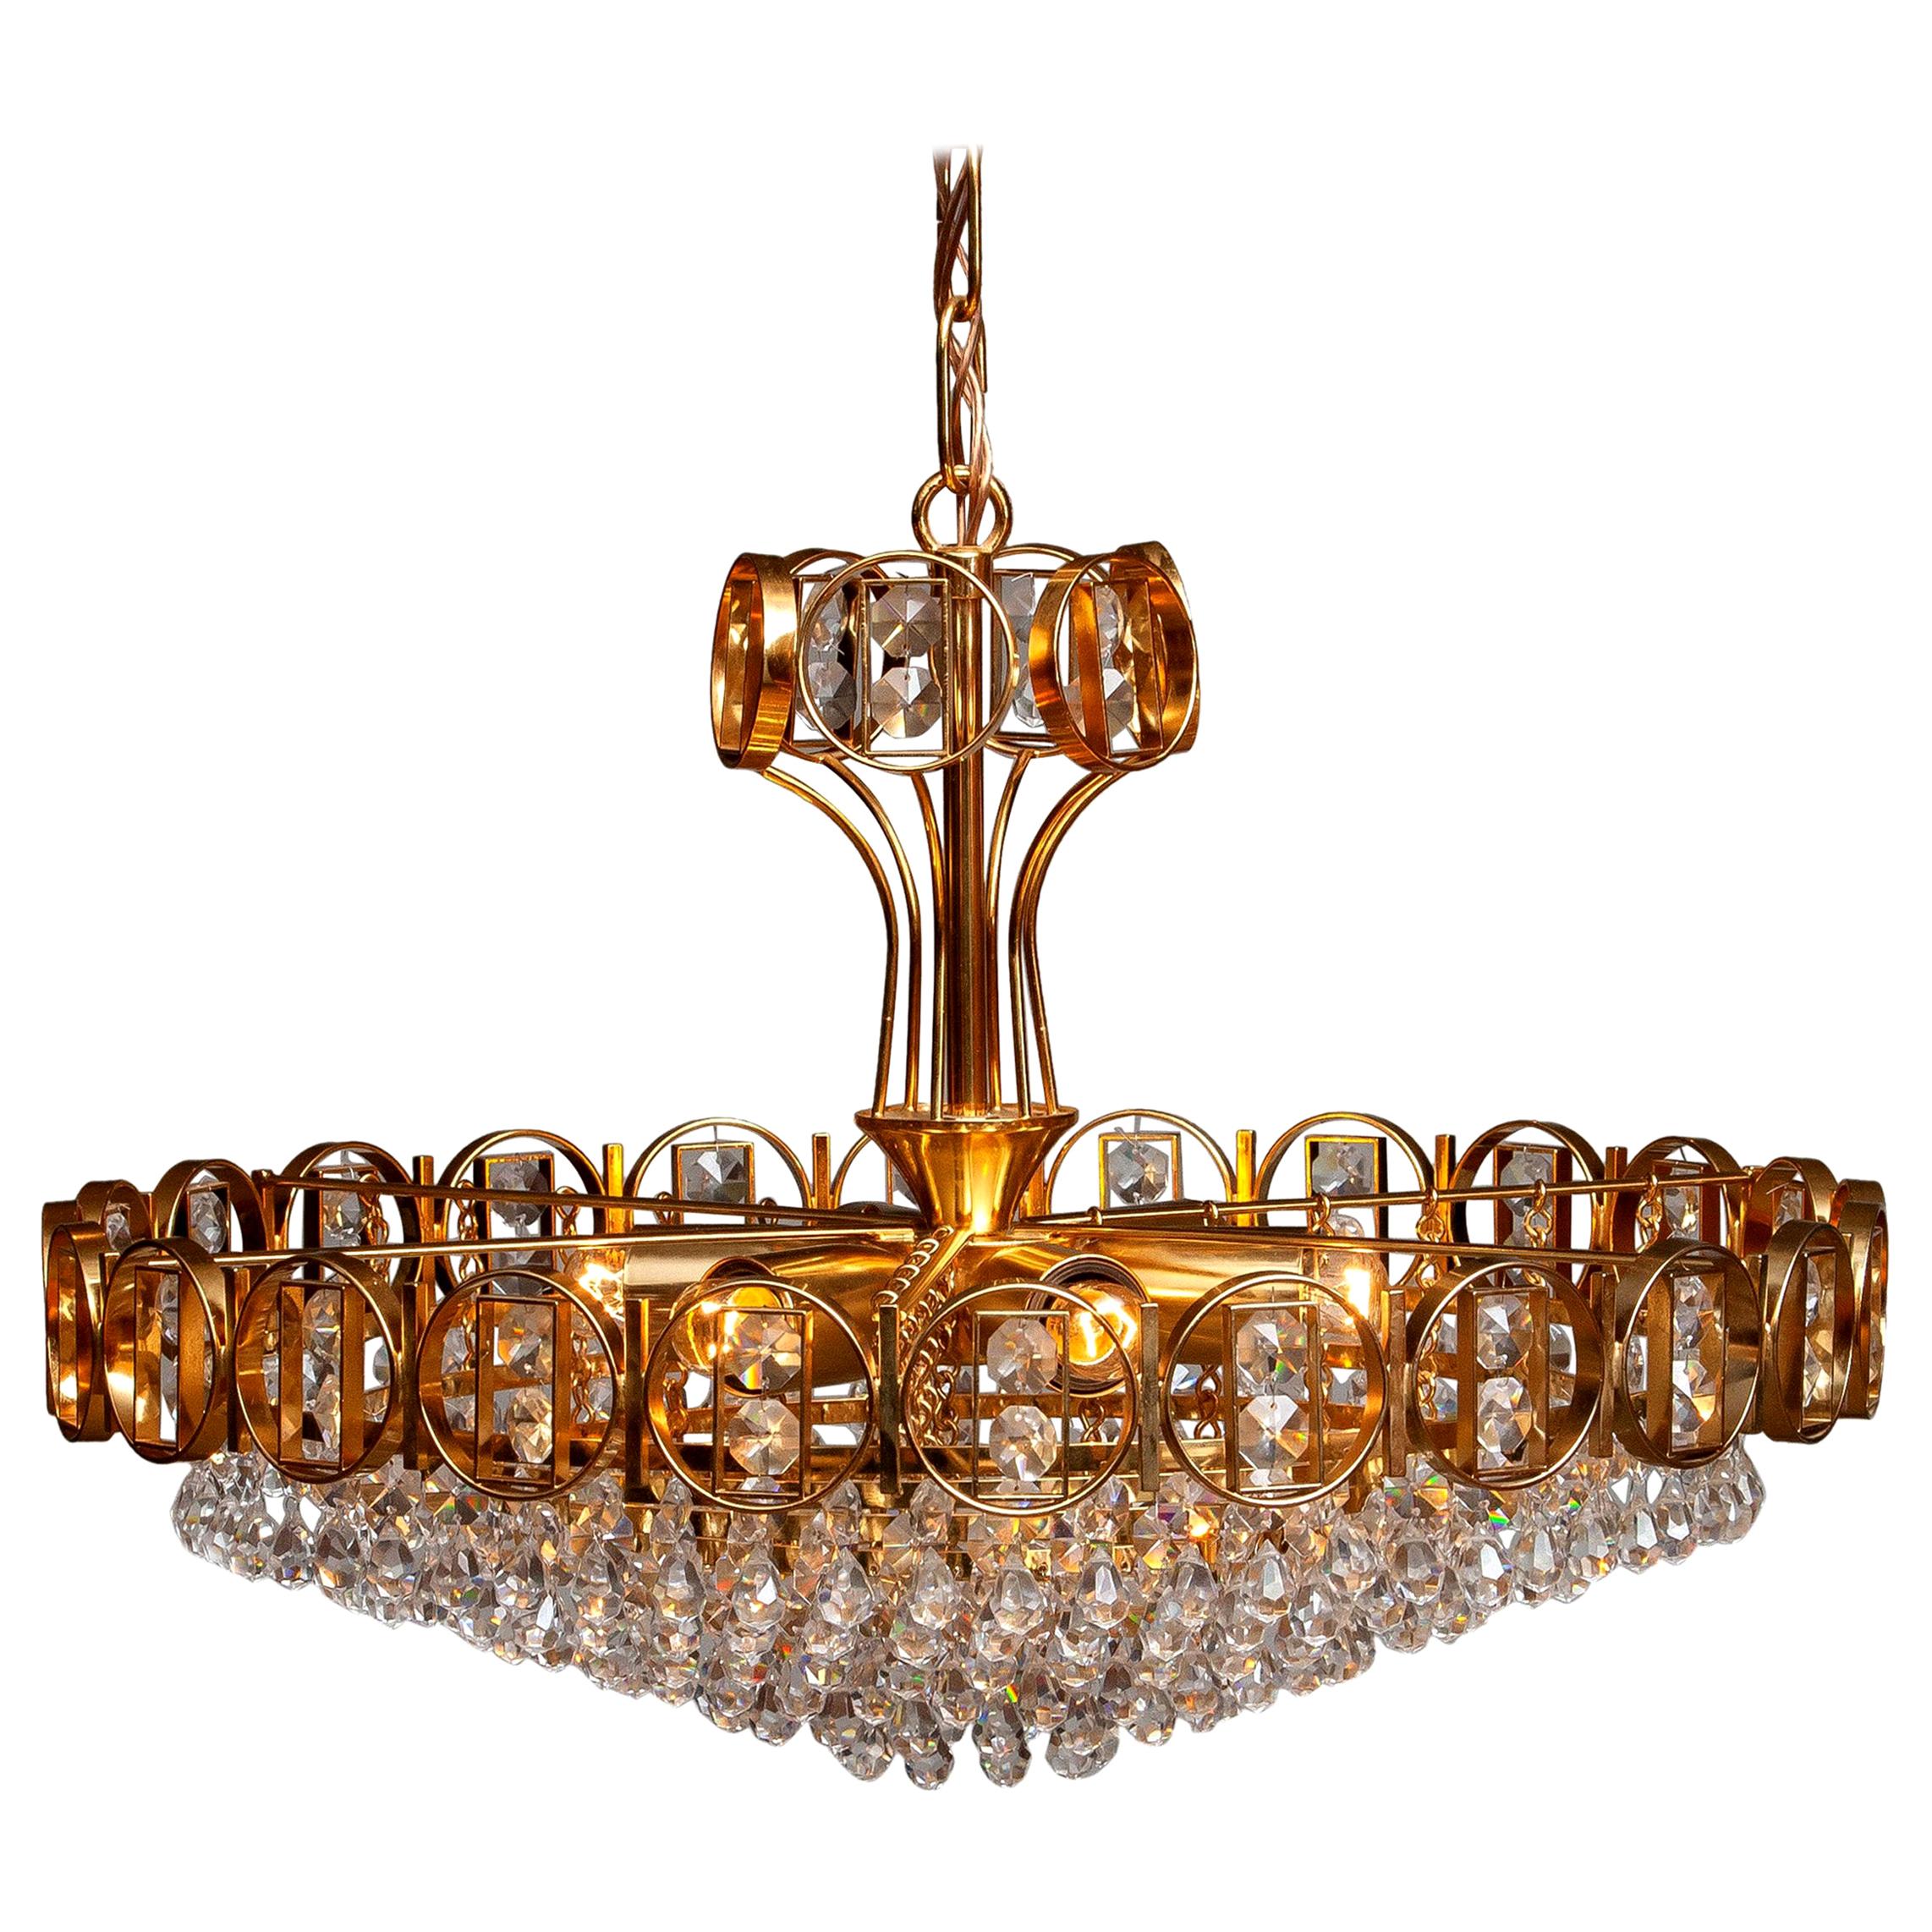 Mid-Century Modern 1970s, Gold-Plated Brass Chandelier with Faceted Crystals Made by Palwa, Germany